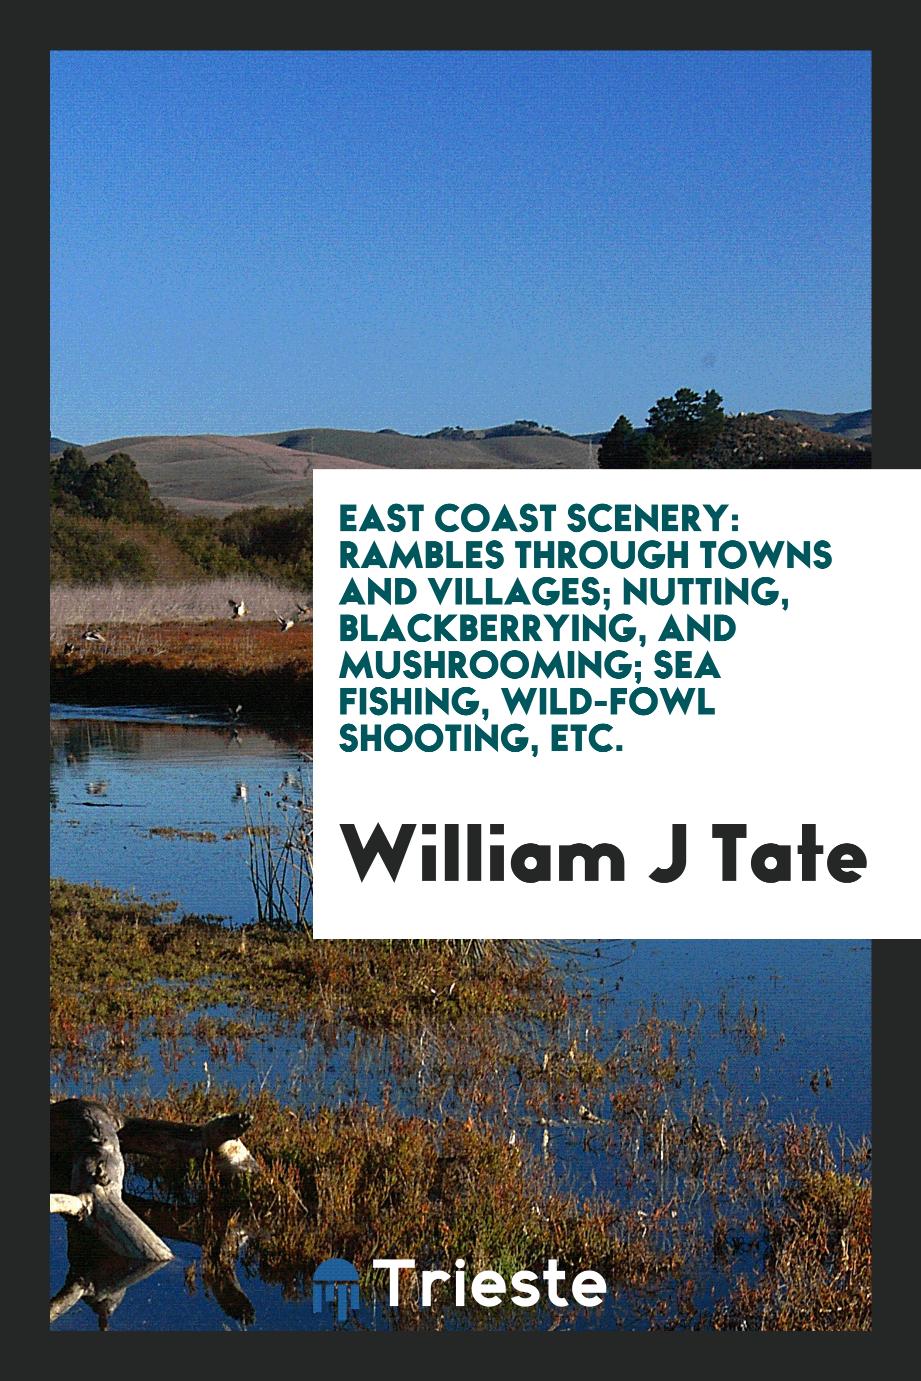 East Coast Scenery: Rambles through Towns and Villages; Nutting, Blackberrying, and Mushrooming; Sea Fishing, Wild-Fowl Shooting, Etc.